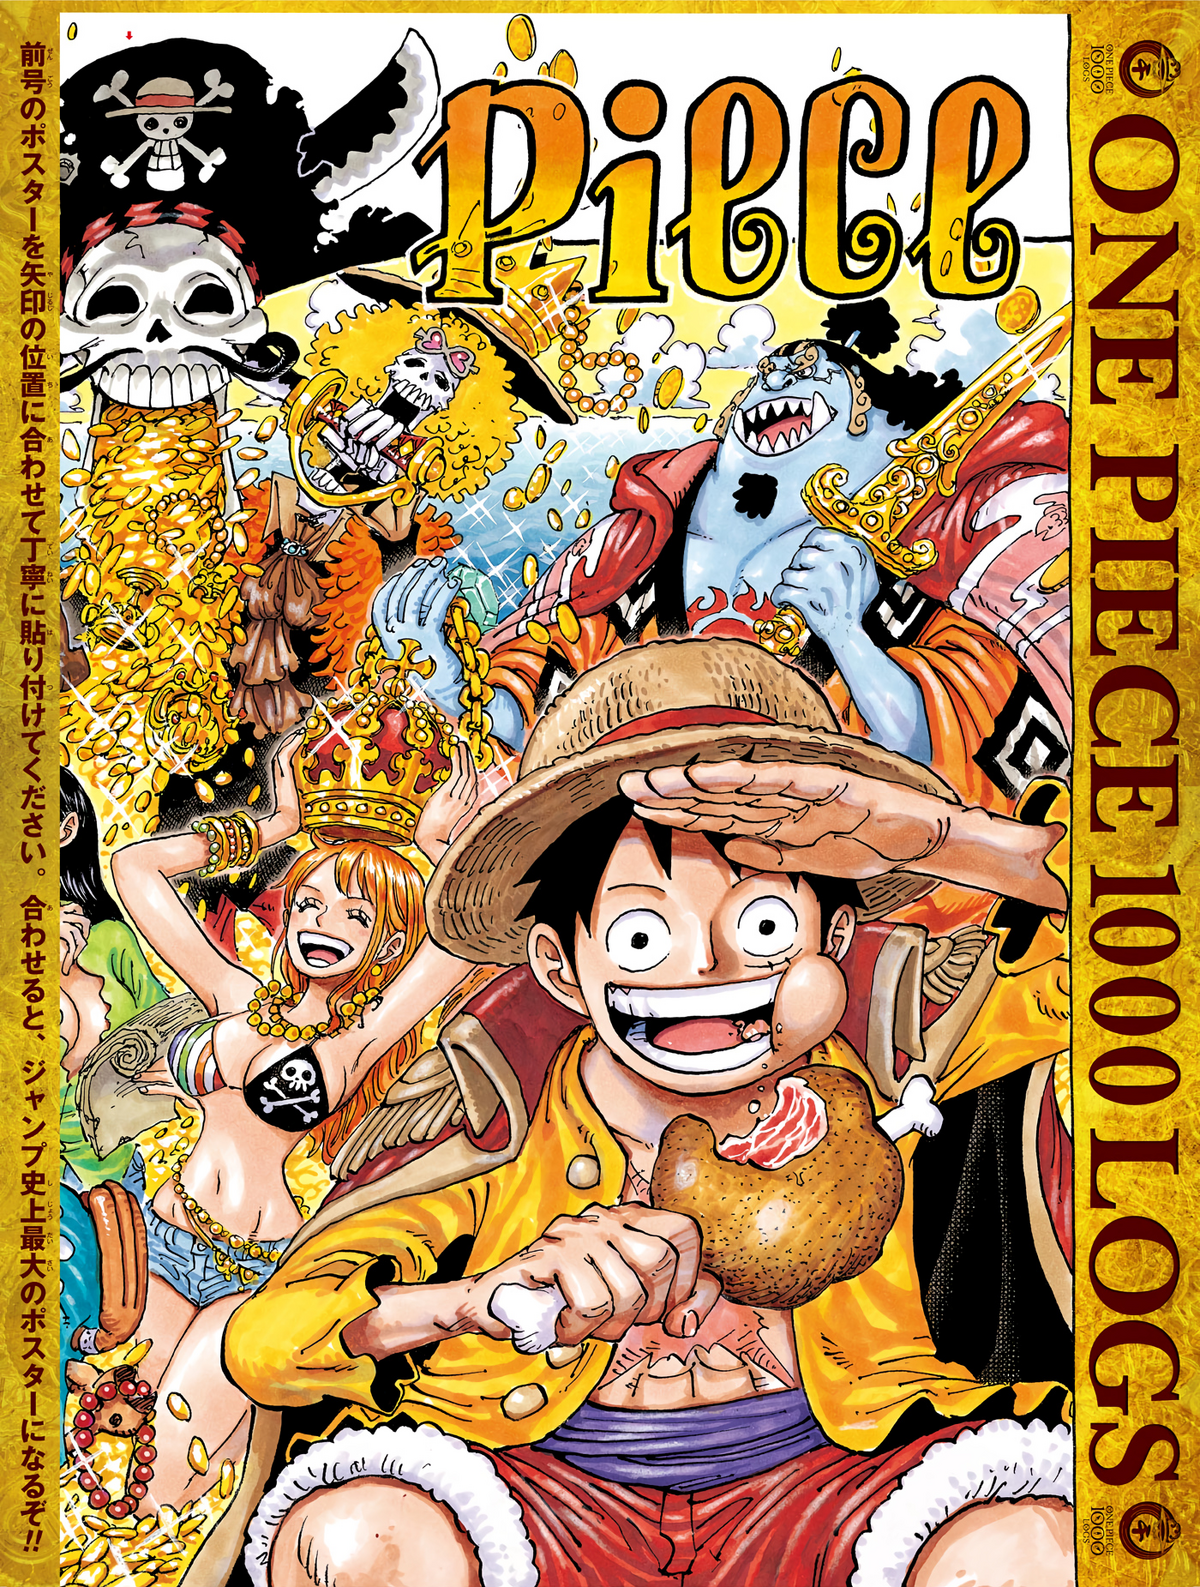 This is 4k Anime One Piece ep 1015 